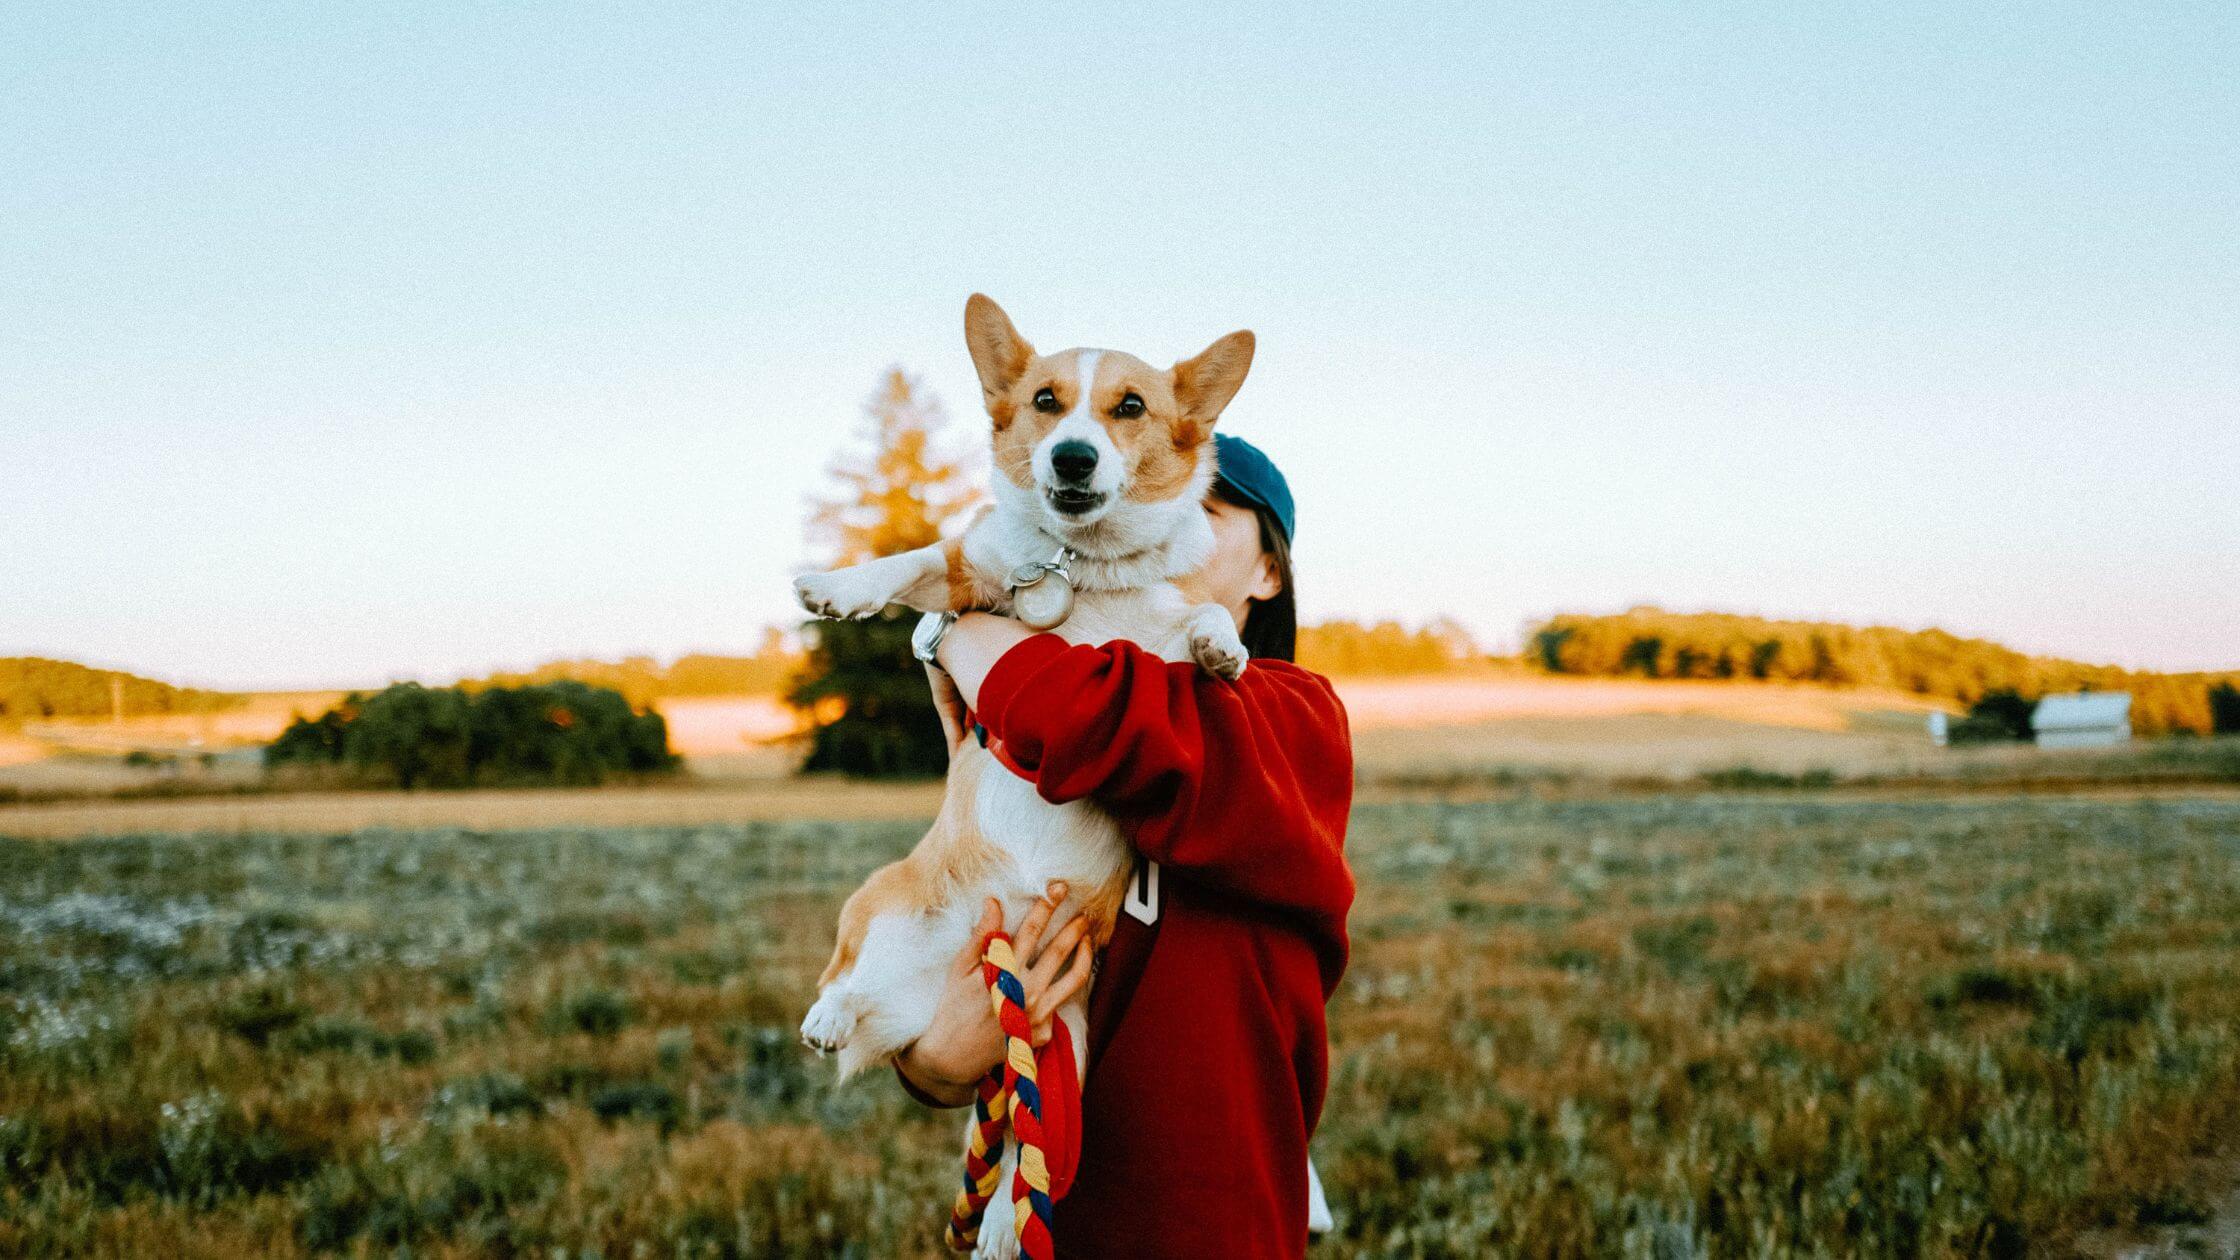 Limone, a red and white corgi is held in mid-air by Maria - wearing a blue cap and red sweater. Limone's belly is showing. Limone and Maria are in a field near Peterborough, Ontario.